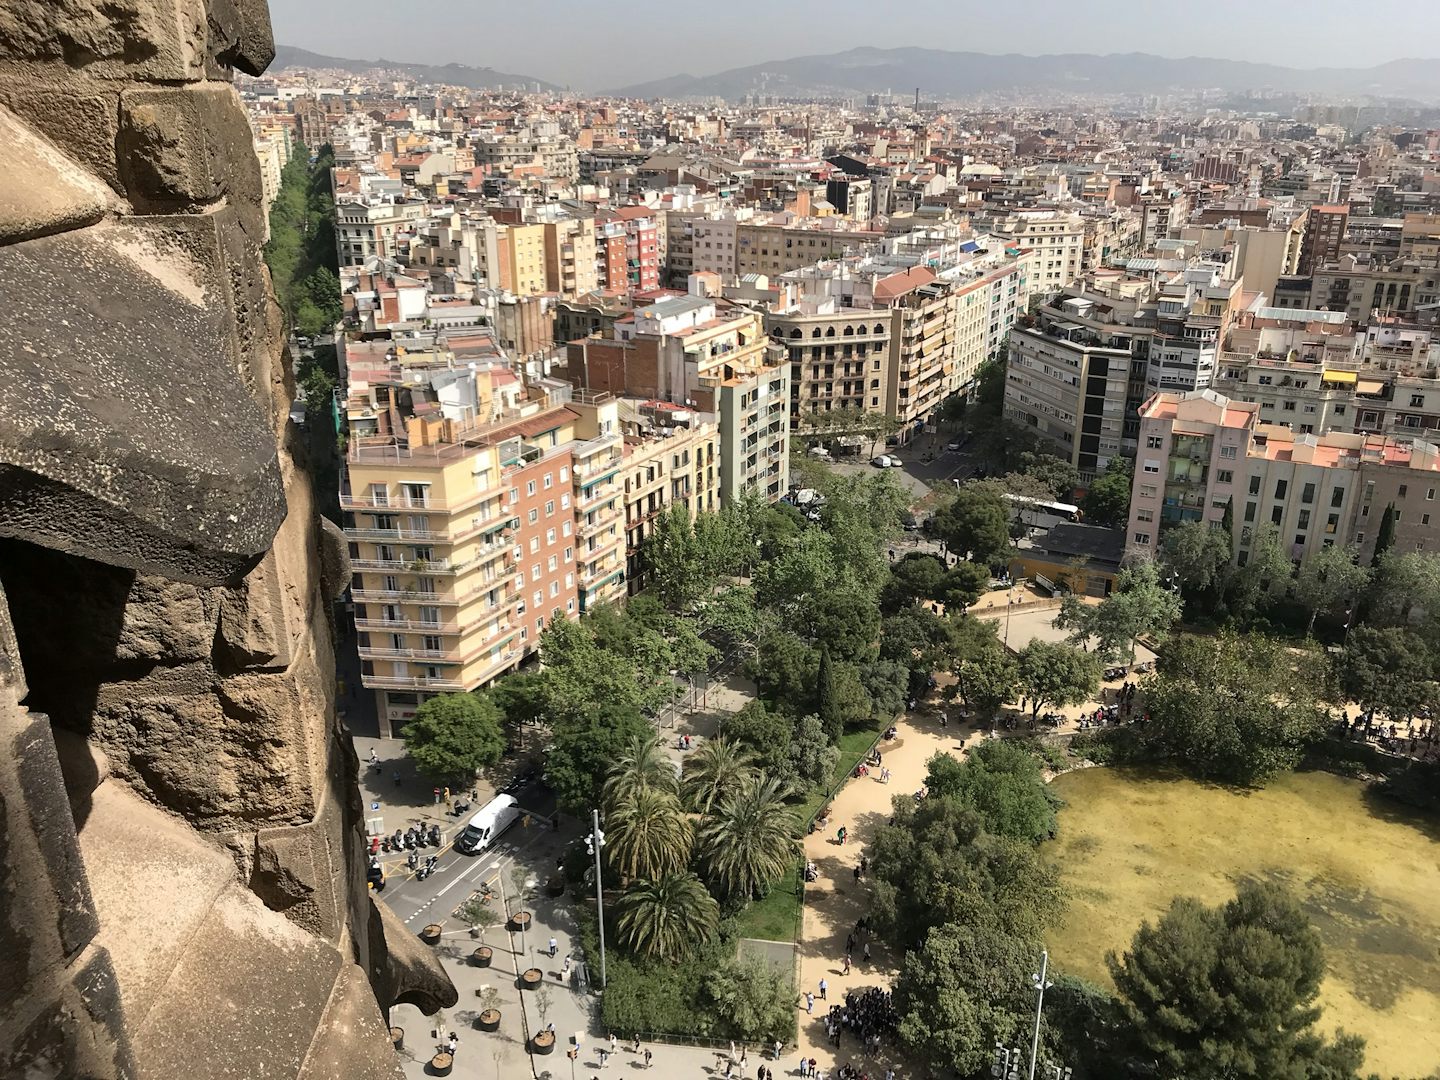 Barcelona city view from the Nativity Tower